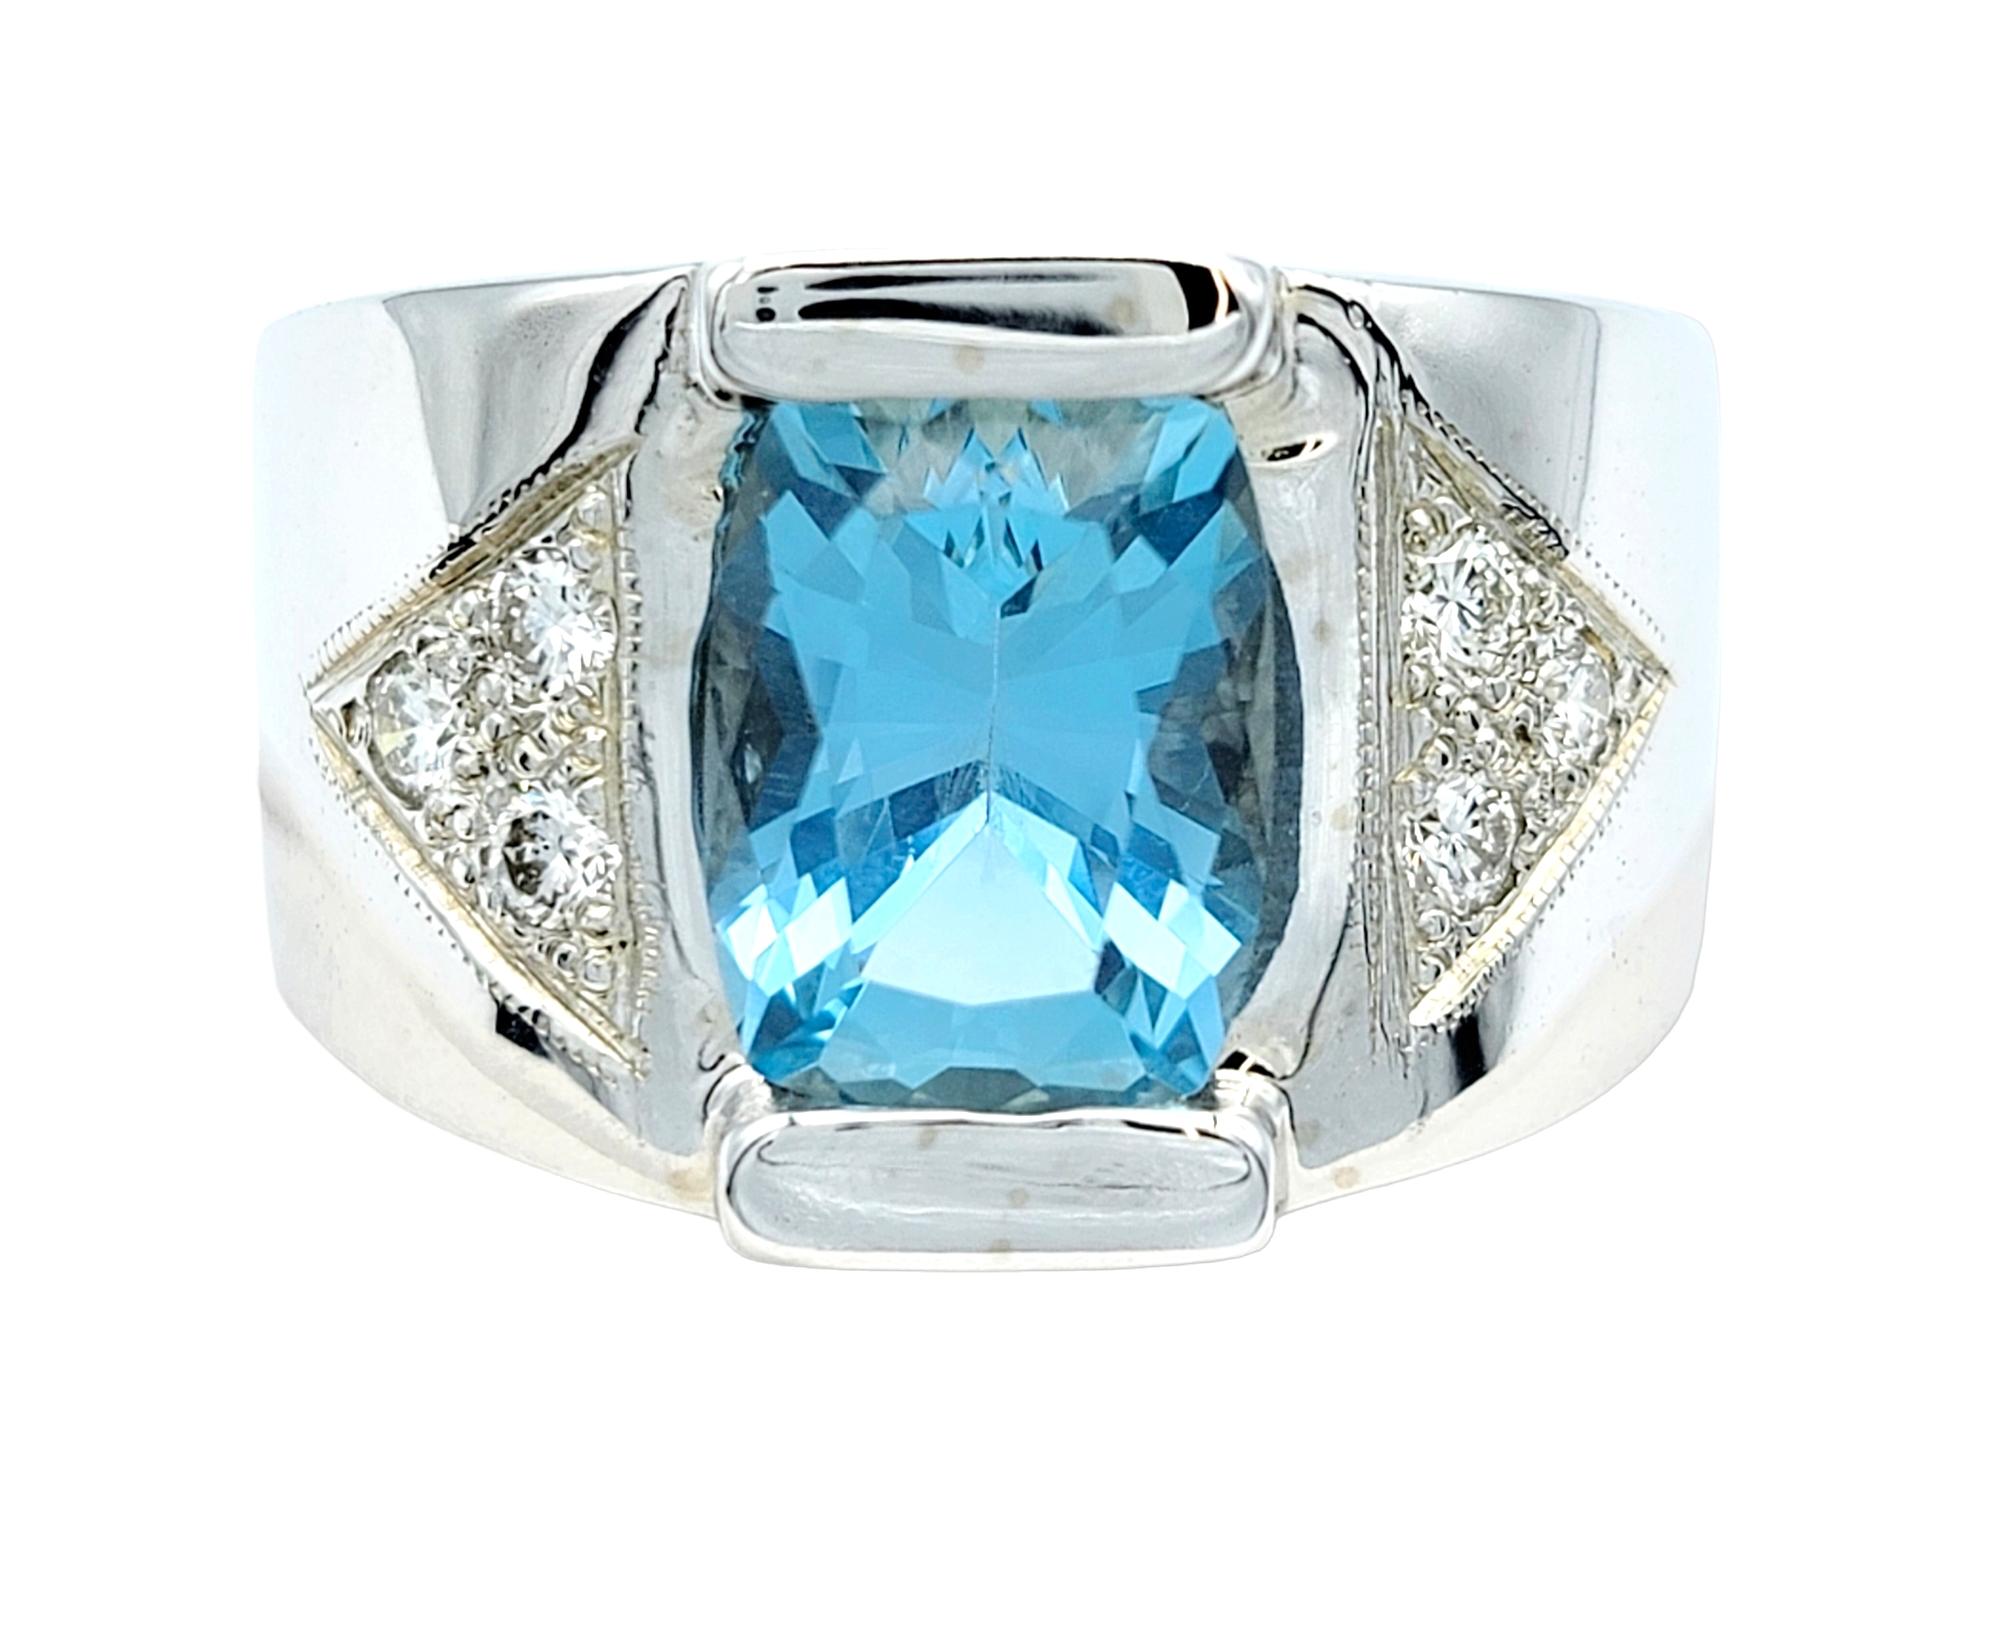 Mens Cushion Cut Aquamarine and Diamond Cigar Band Ring in 14 Karat White Gold In Good Condition For Sale In Scottsdale, AZ